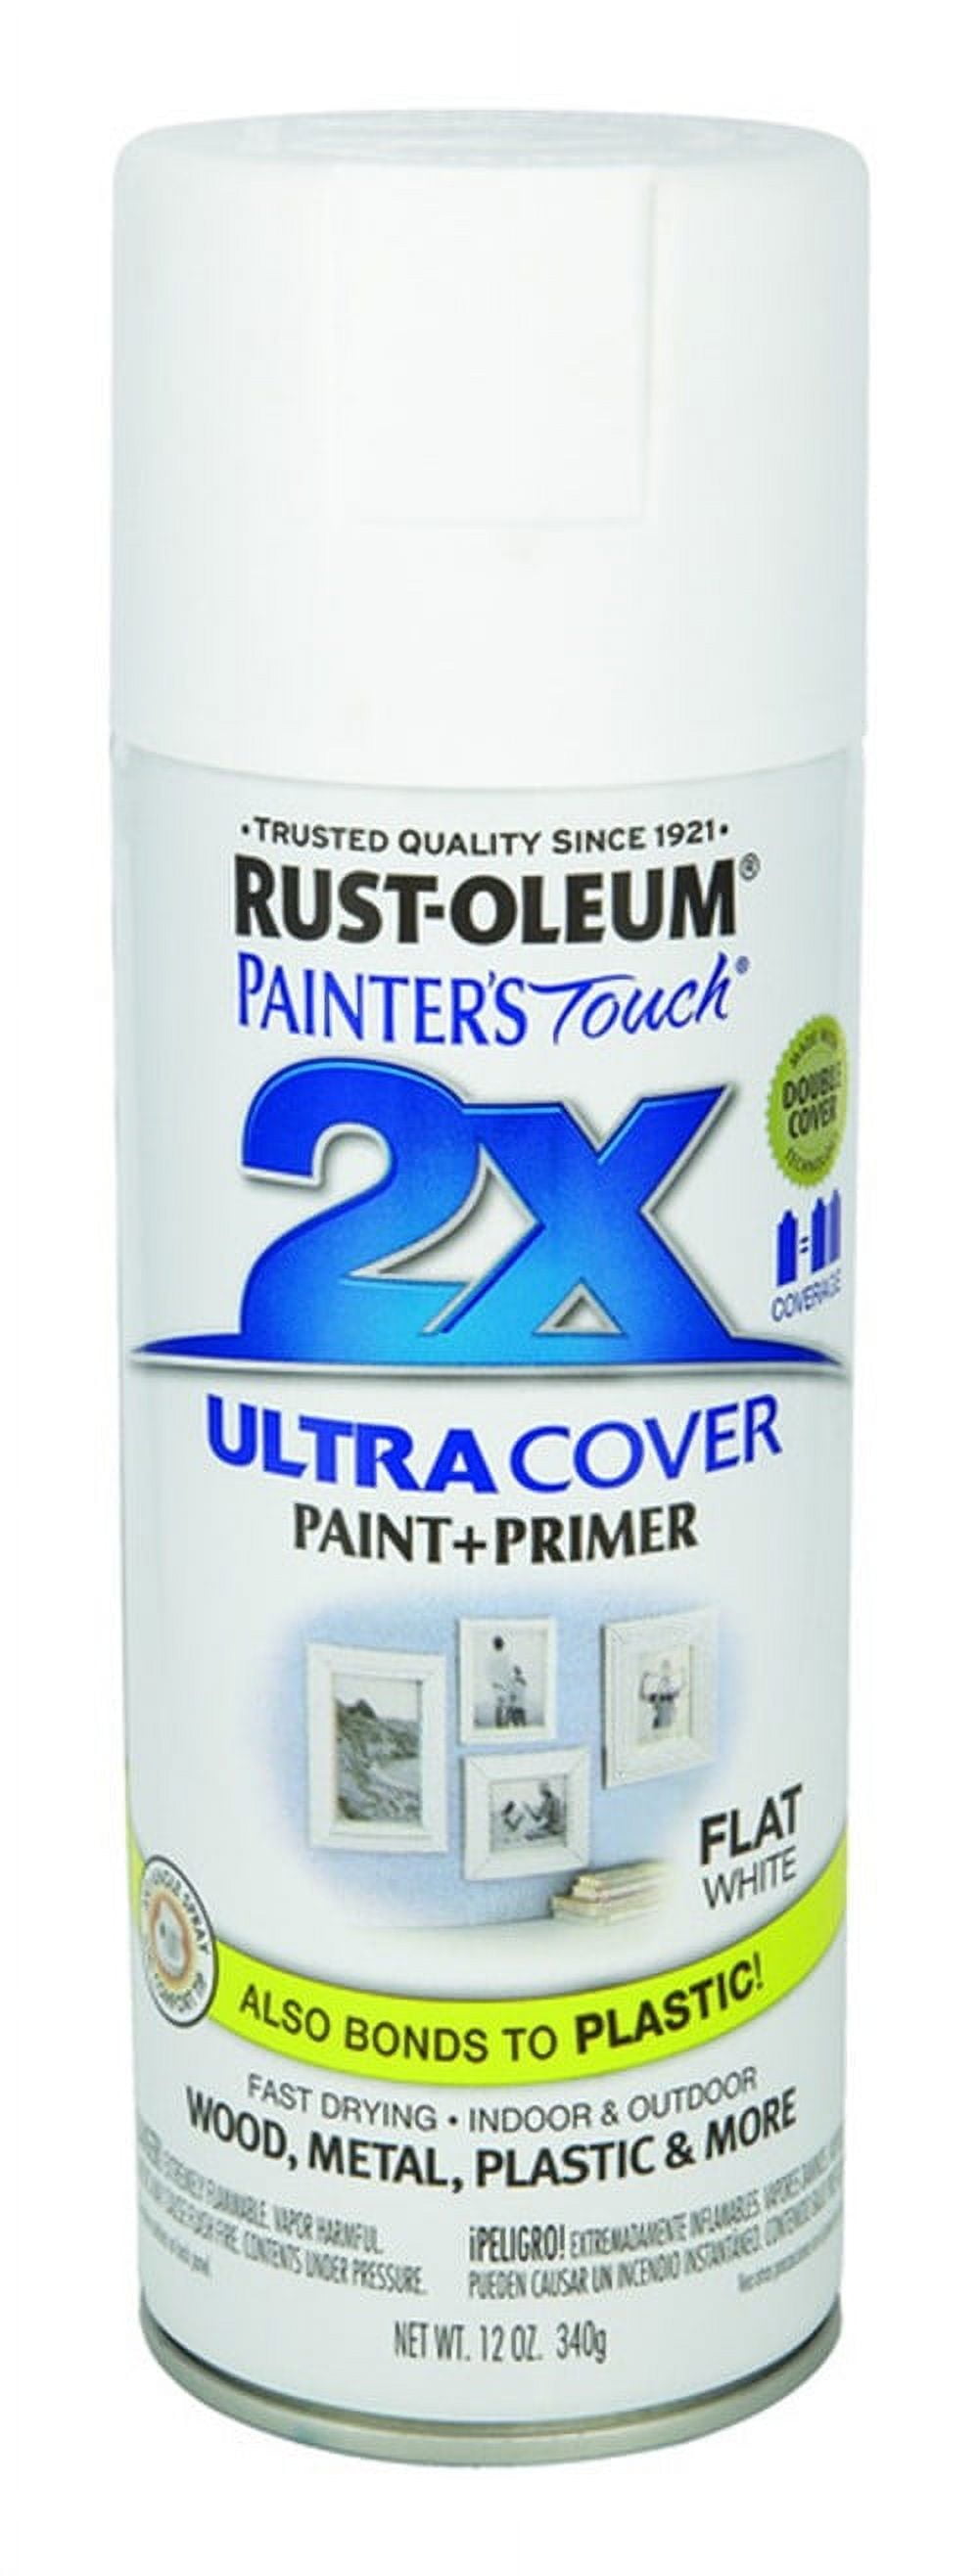 Rust-Oleum Painter's Touch 2X Ultra Cover 12 Oz. Gloss Paint + Primer Spray  Paint, White - Town Hardware & General Store